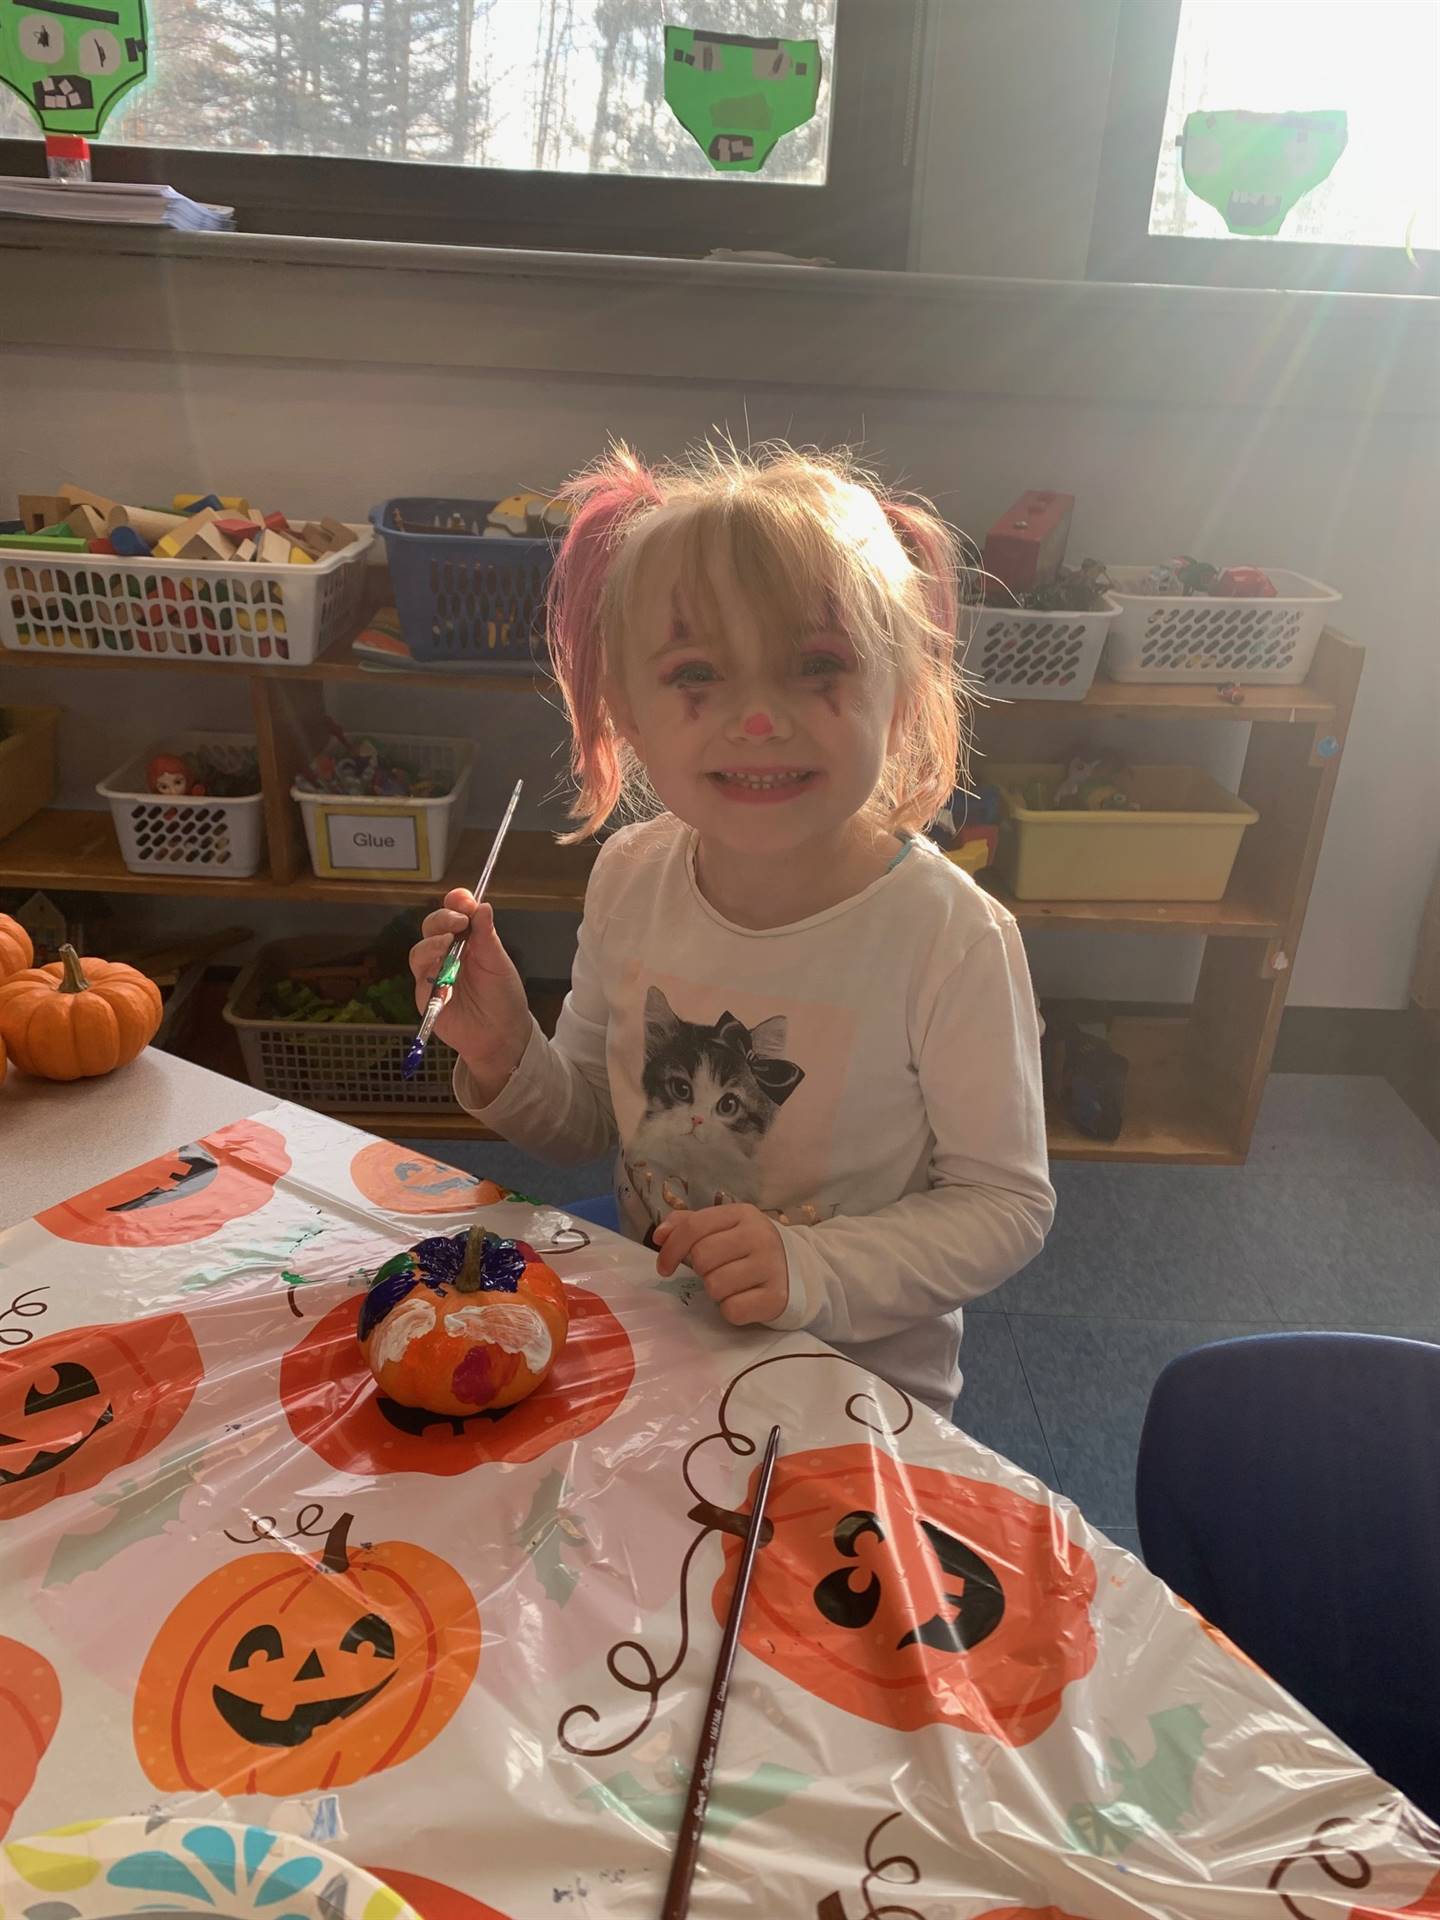 student painting a pumpkin on a pumpkin patterned tablecloth.